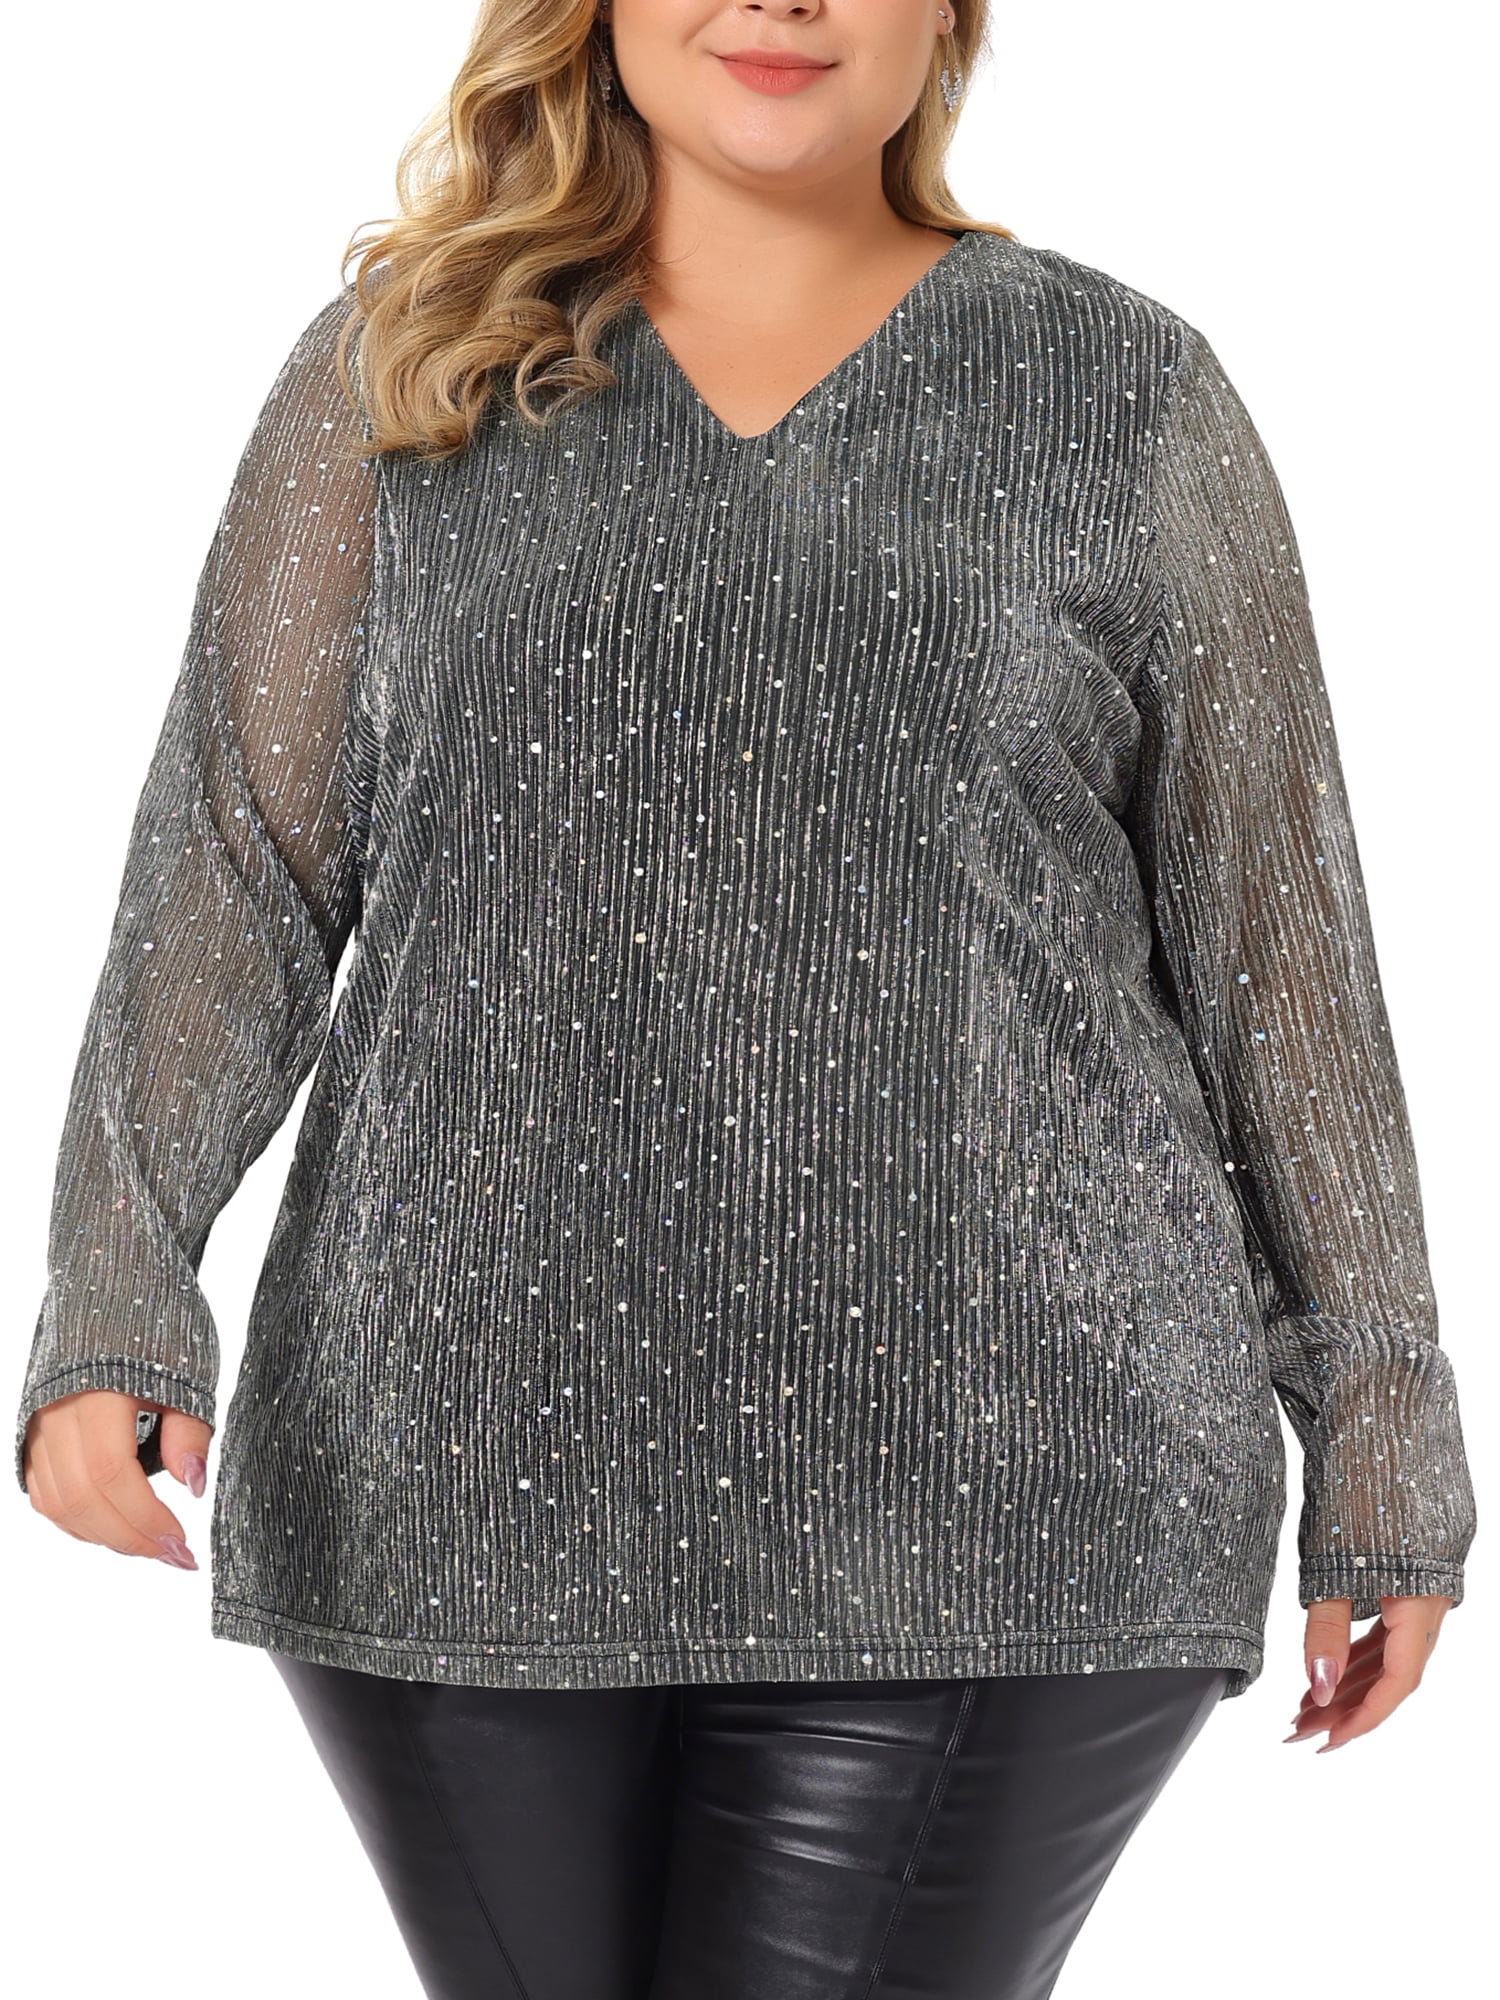 Plus Size 3 4 Sleeve Tops